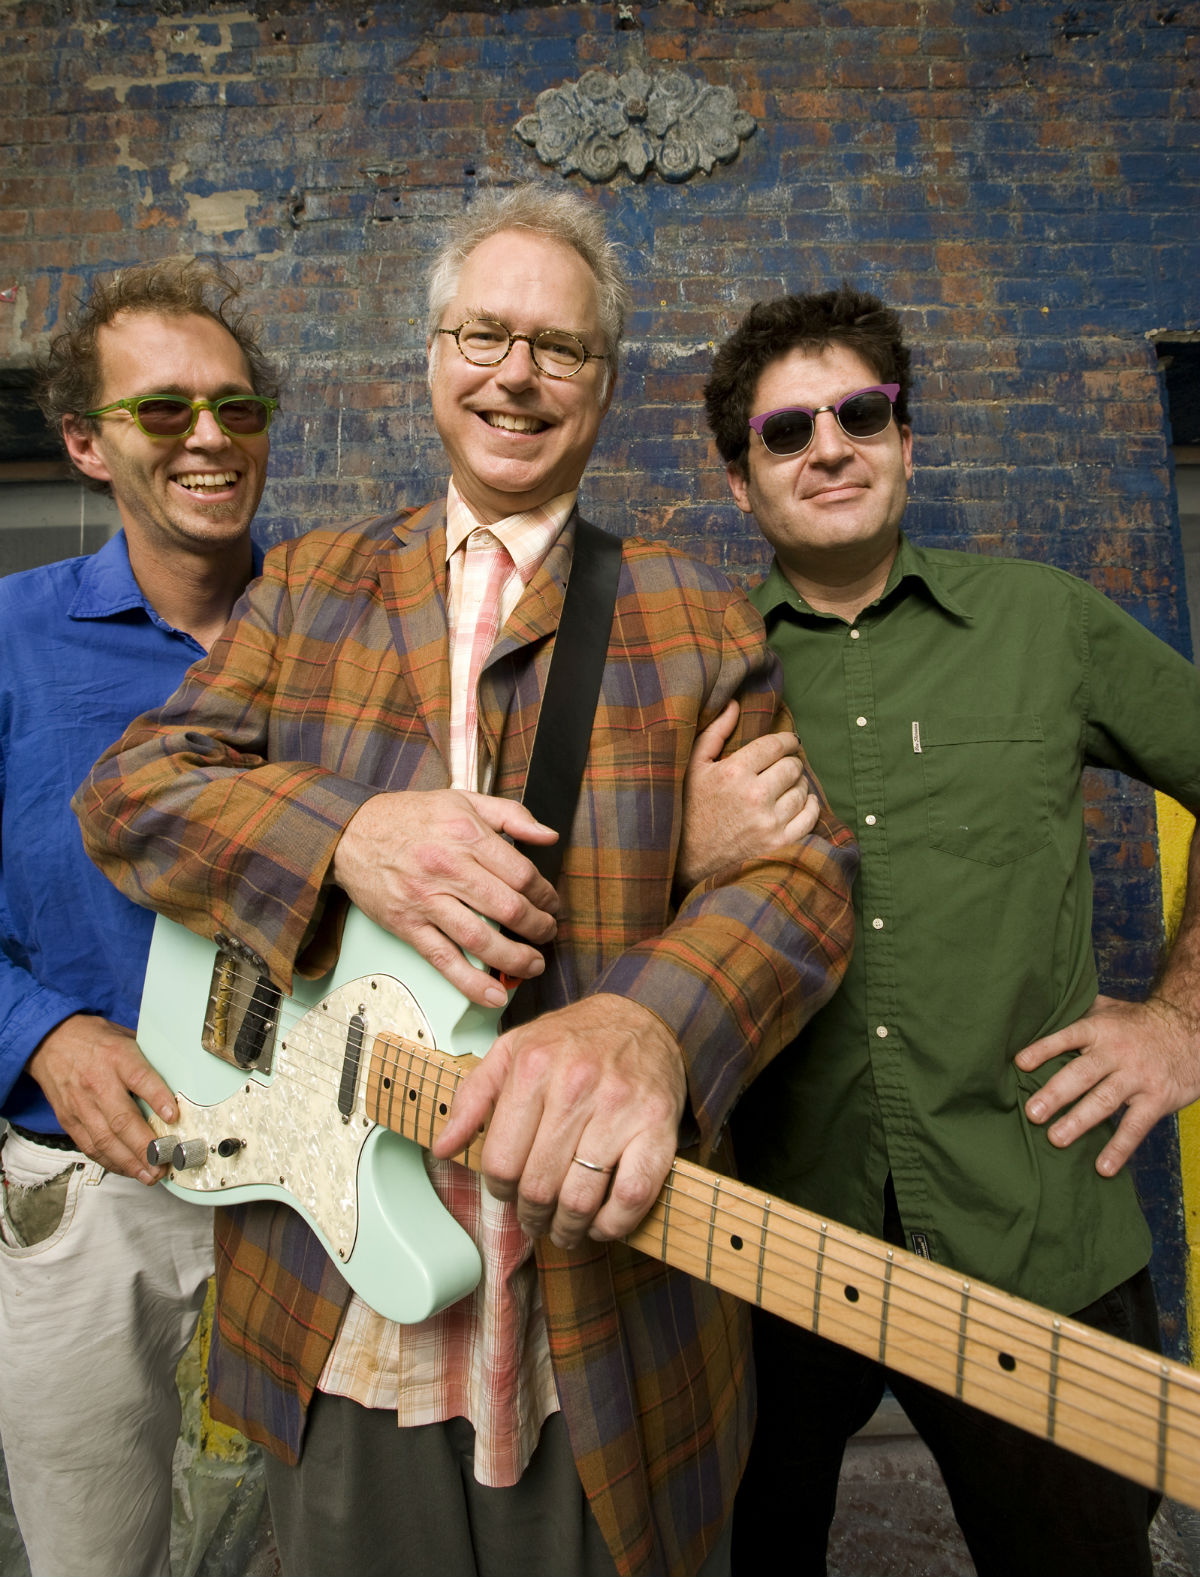 Bill Frisell opens the final week of the Festival Canarias Jazz & Más Canarias with two concerts